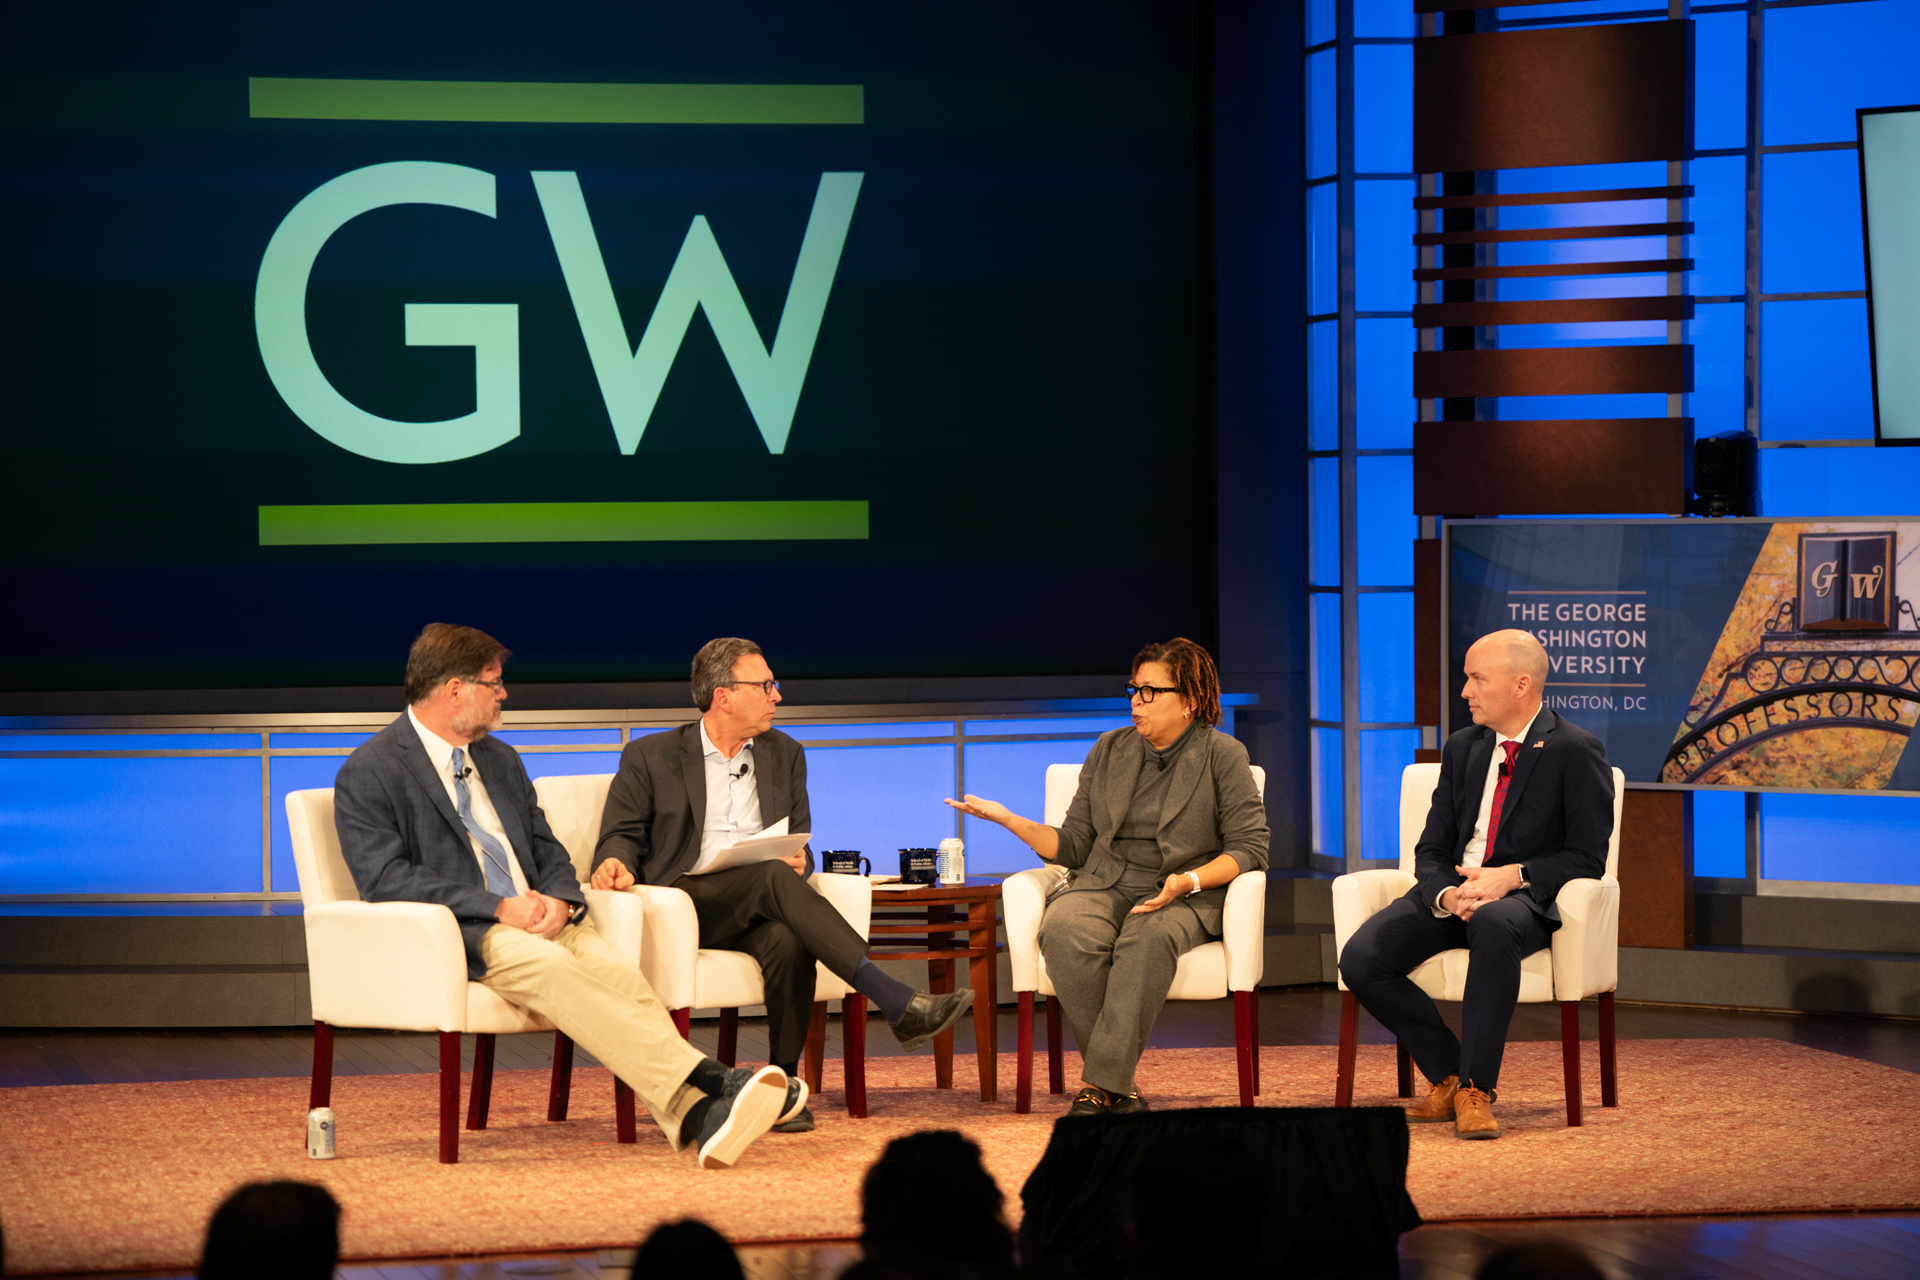 Four people talking on stage with GW logo in background.